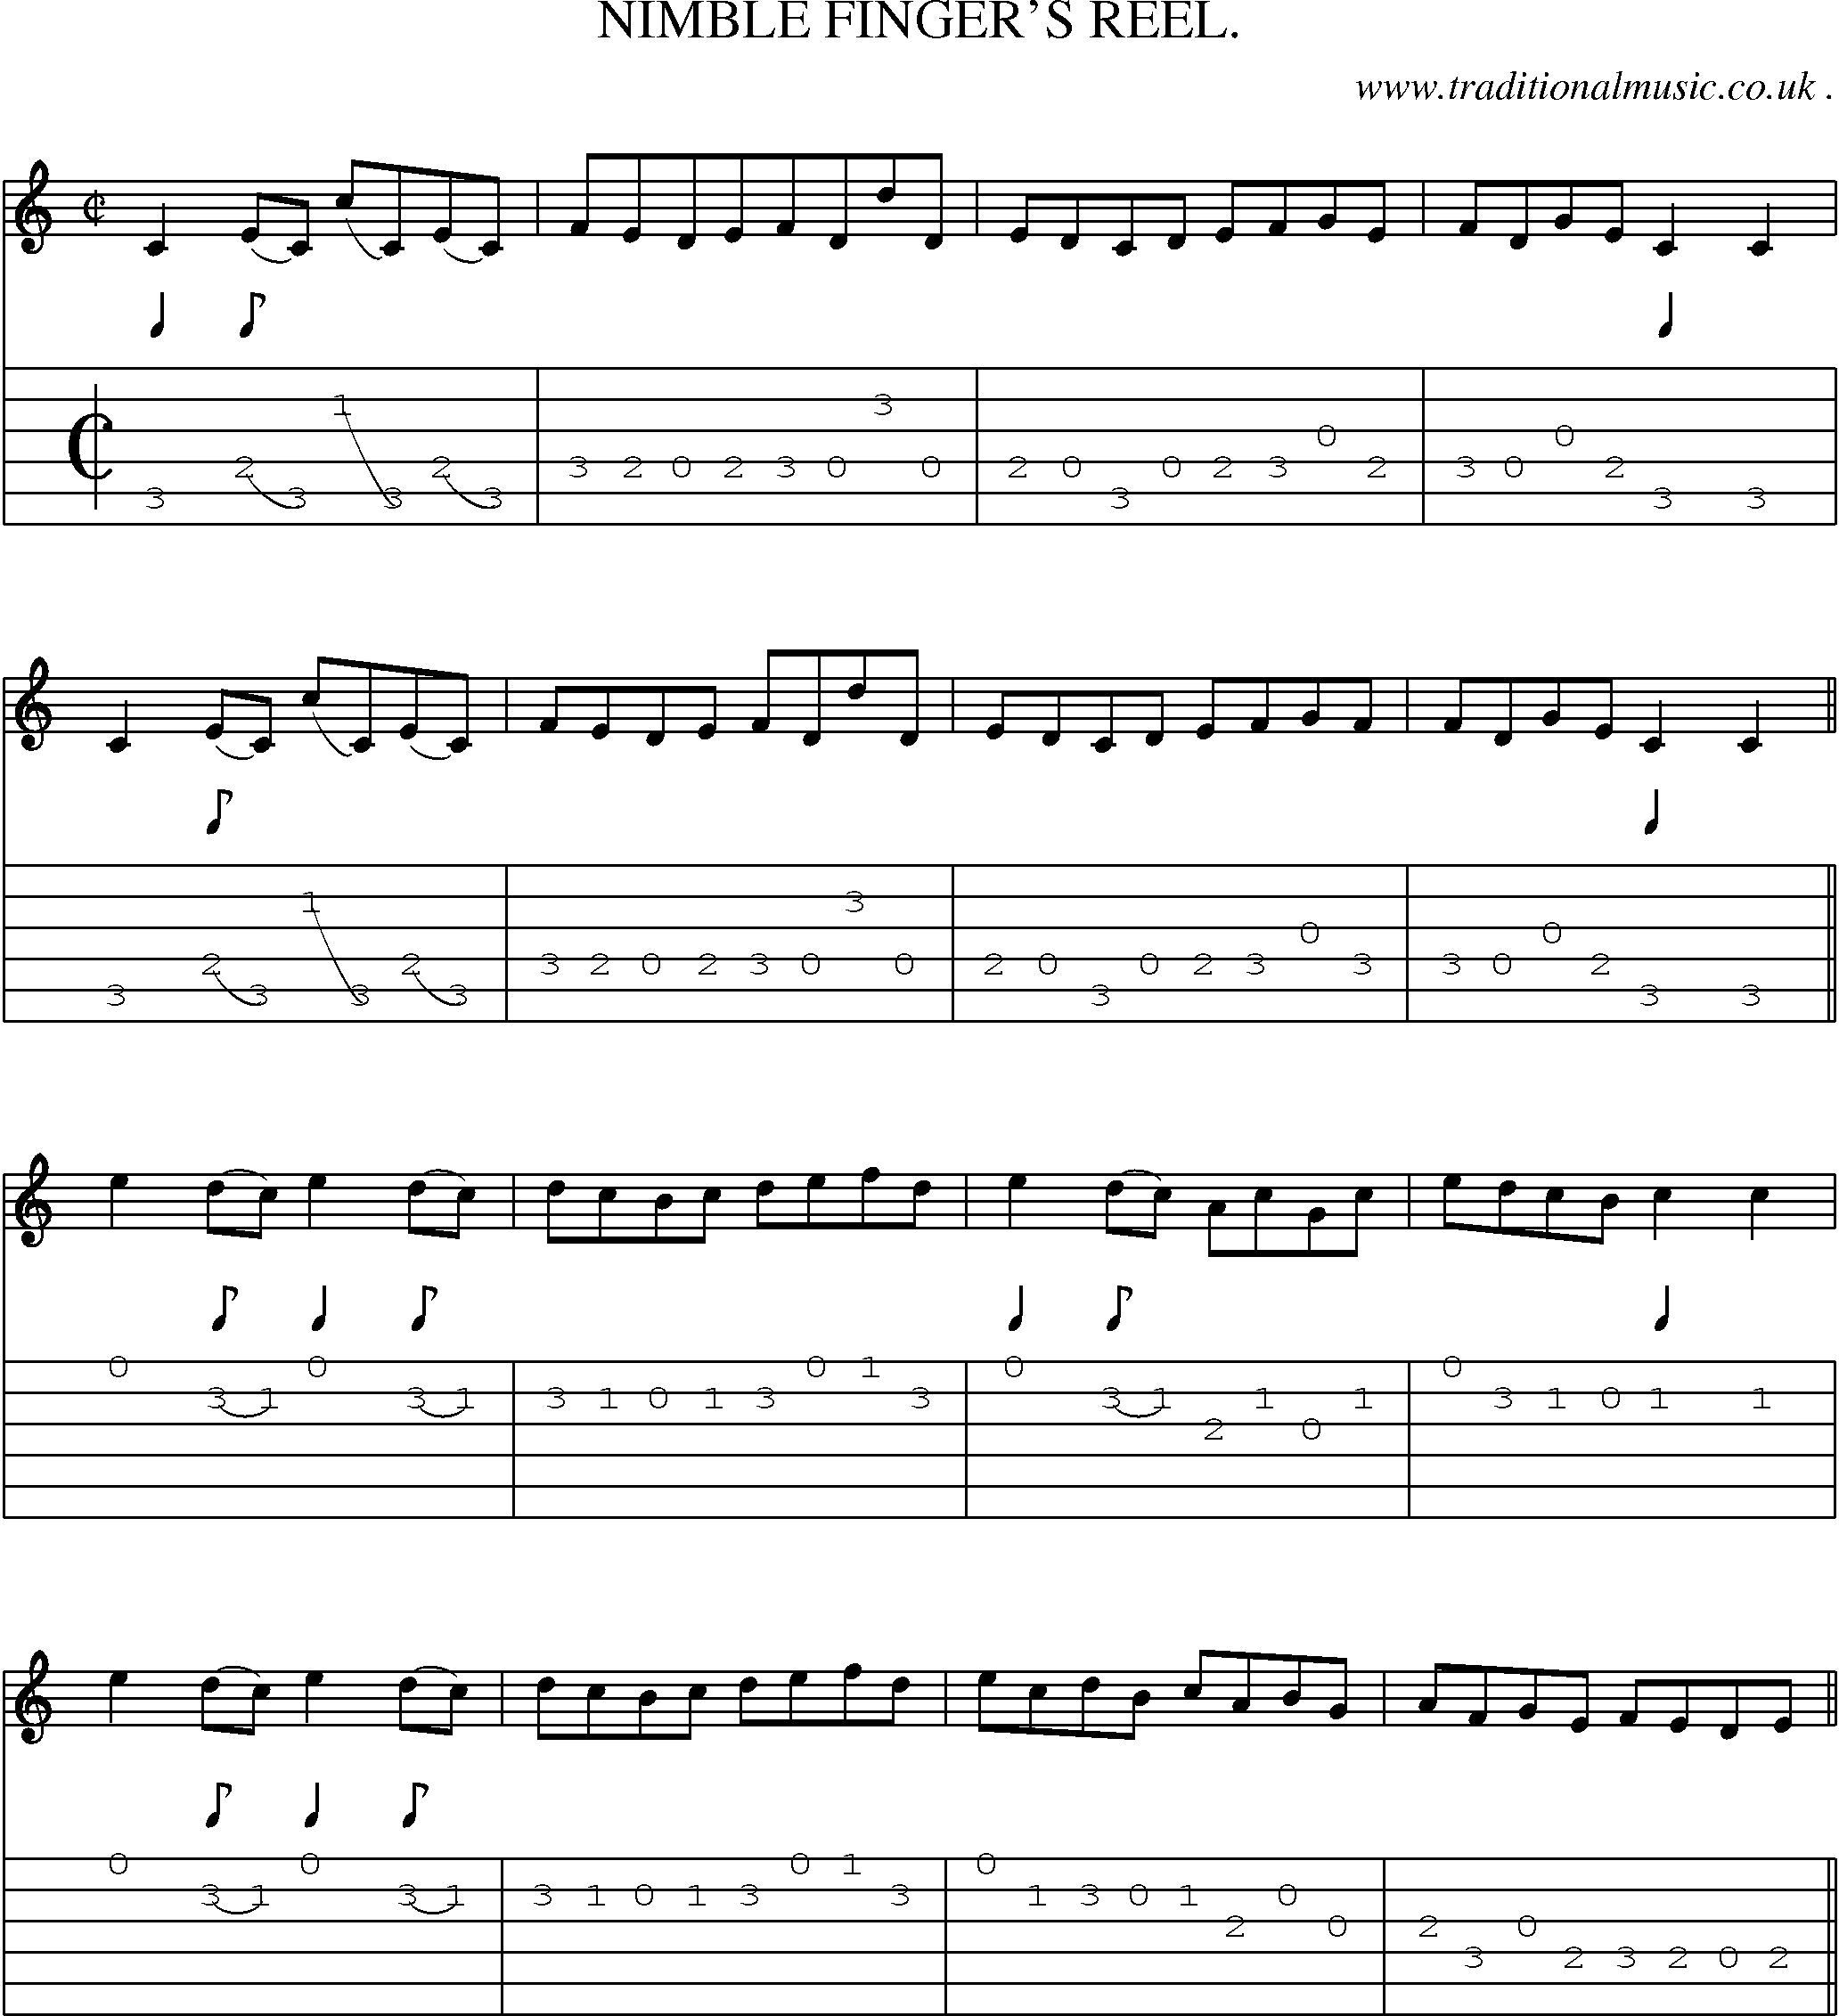 Sheet-Music and Guitar Tabs for Nimble Fingers Reel